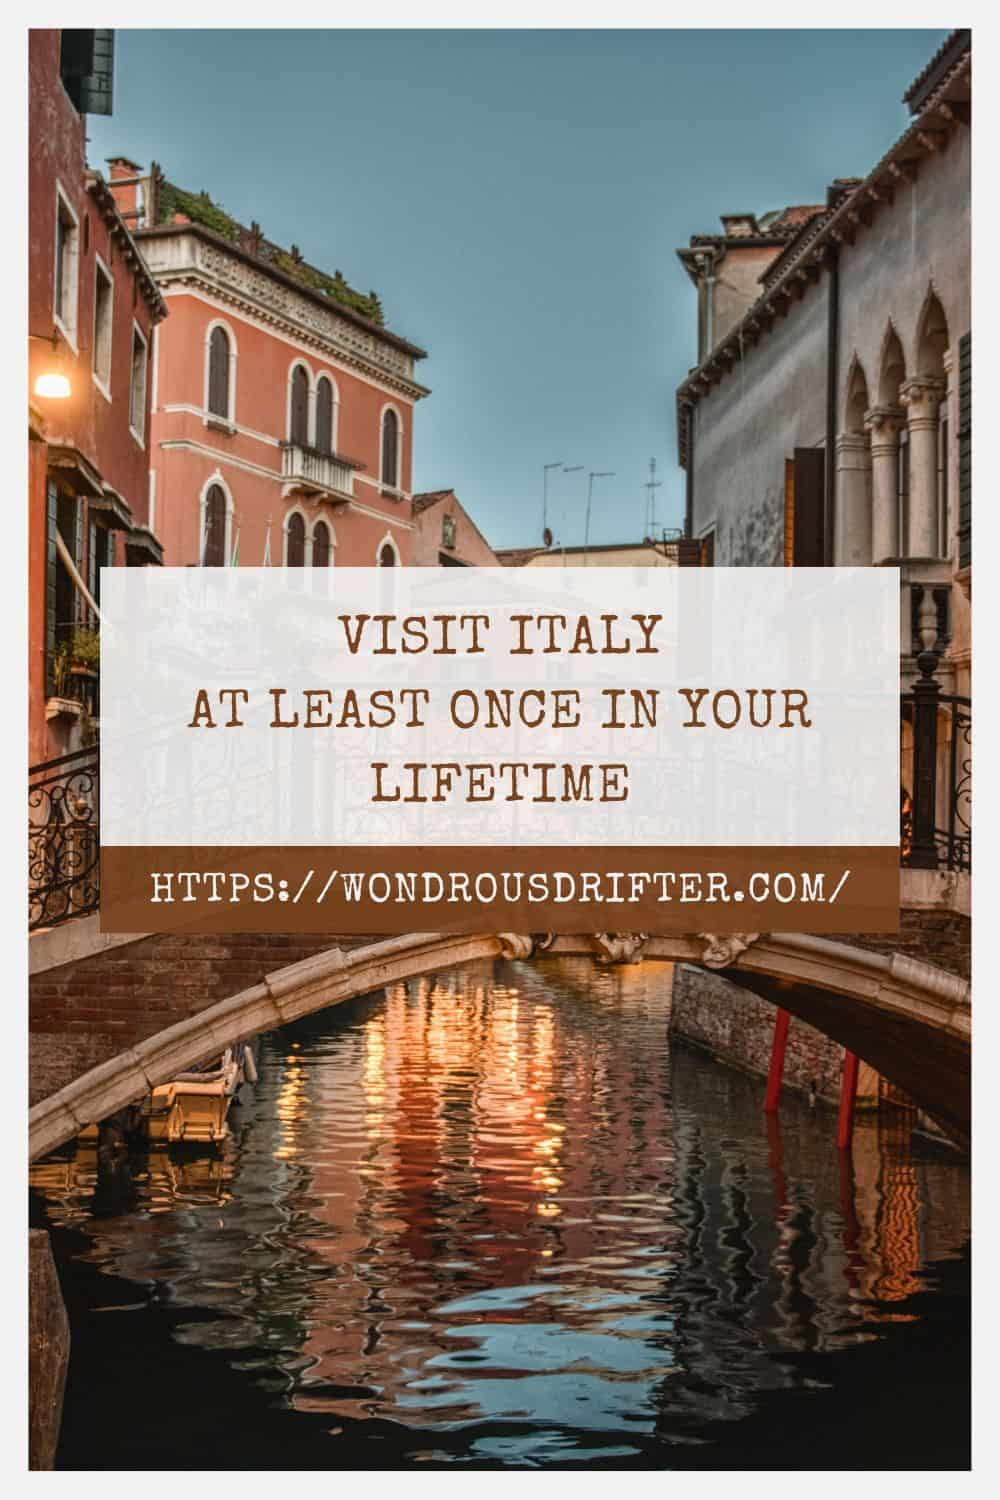 Visit Italy at least once in your lifetime